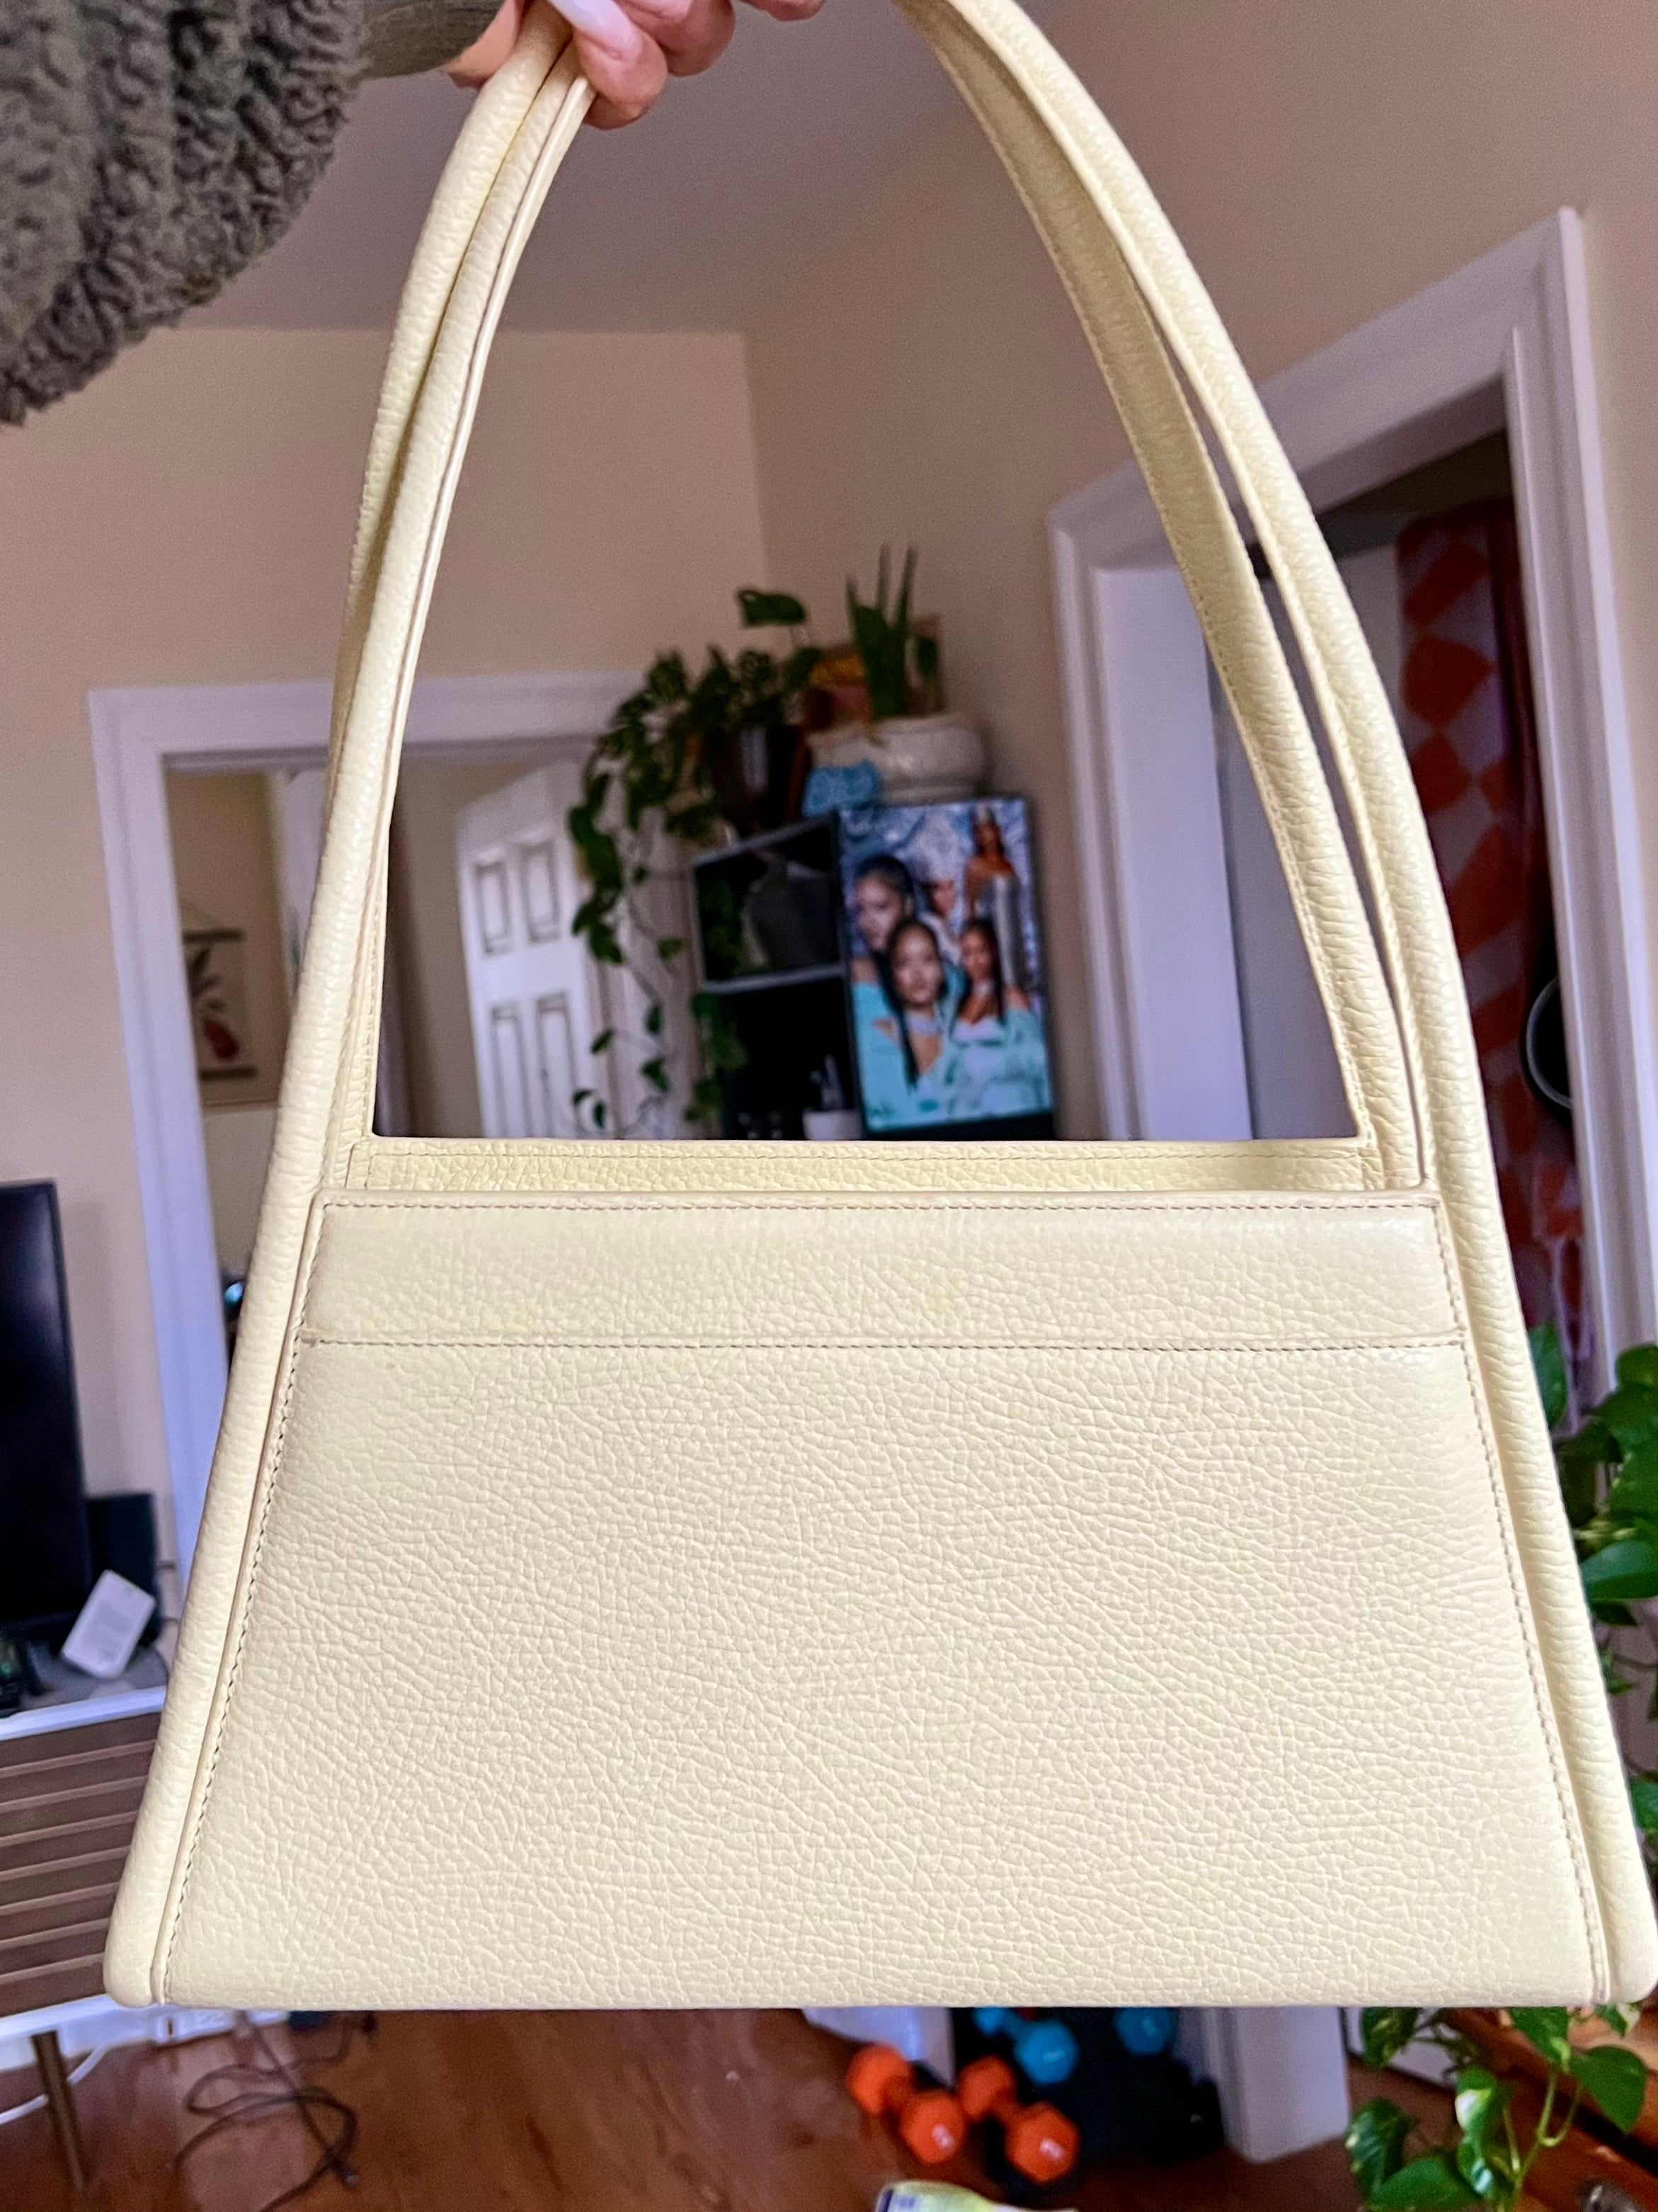 Get Summer Handbag Styles at Behno for up to 60% Off Sitewide - CNET